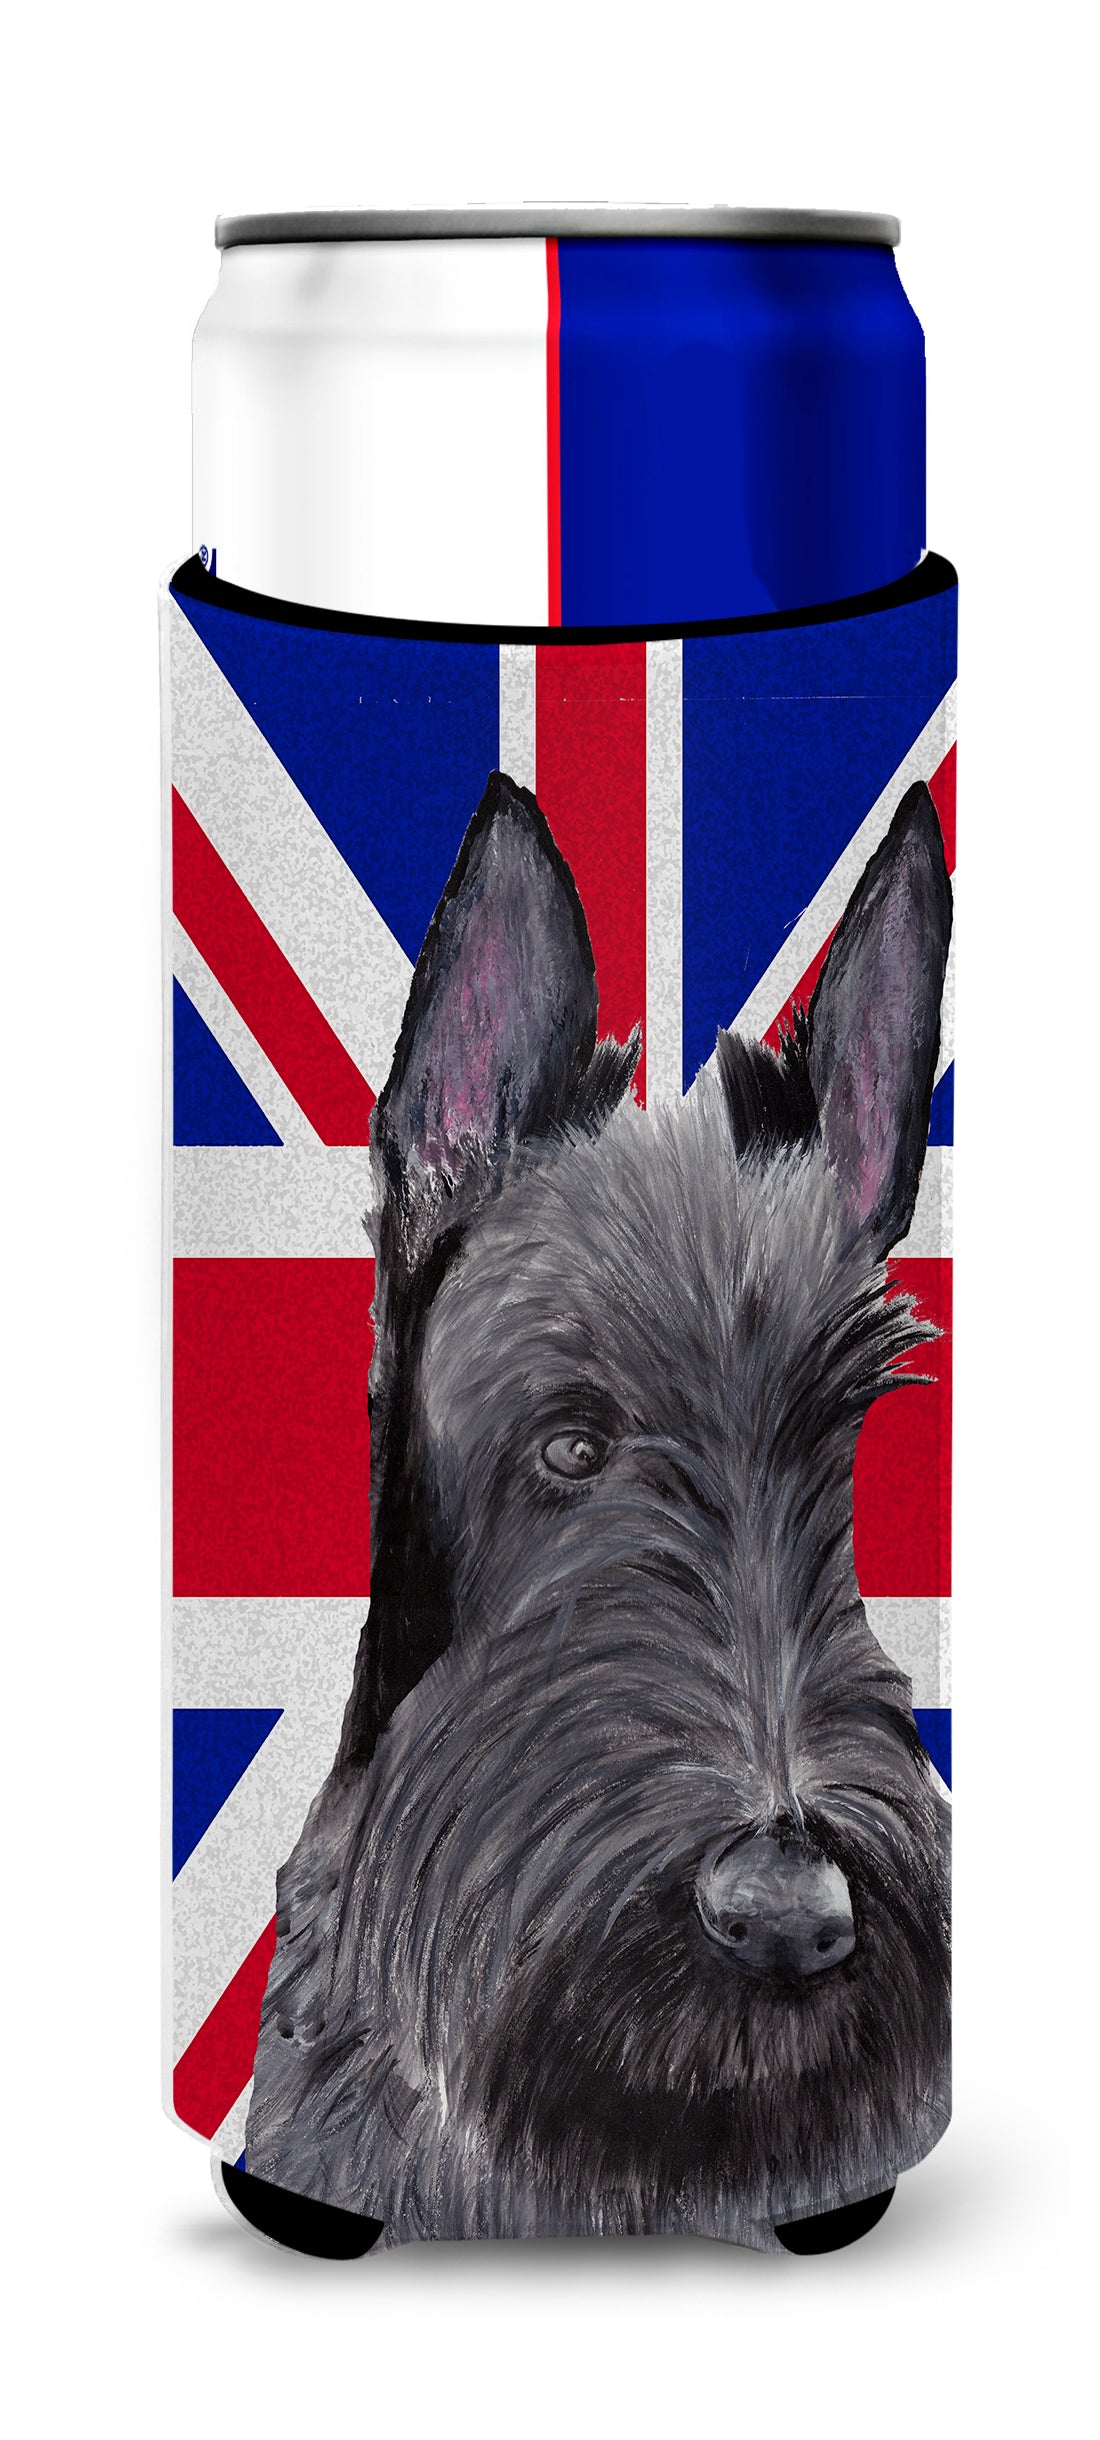 Scottish Terrier with English Union Jack British Flag Ultra Beverage Insulators for slim cans SC9843MUK